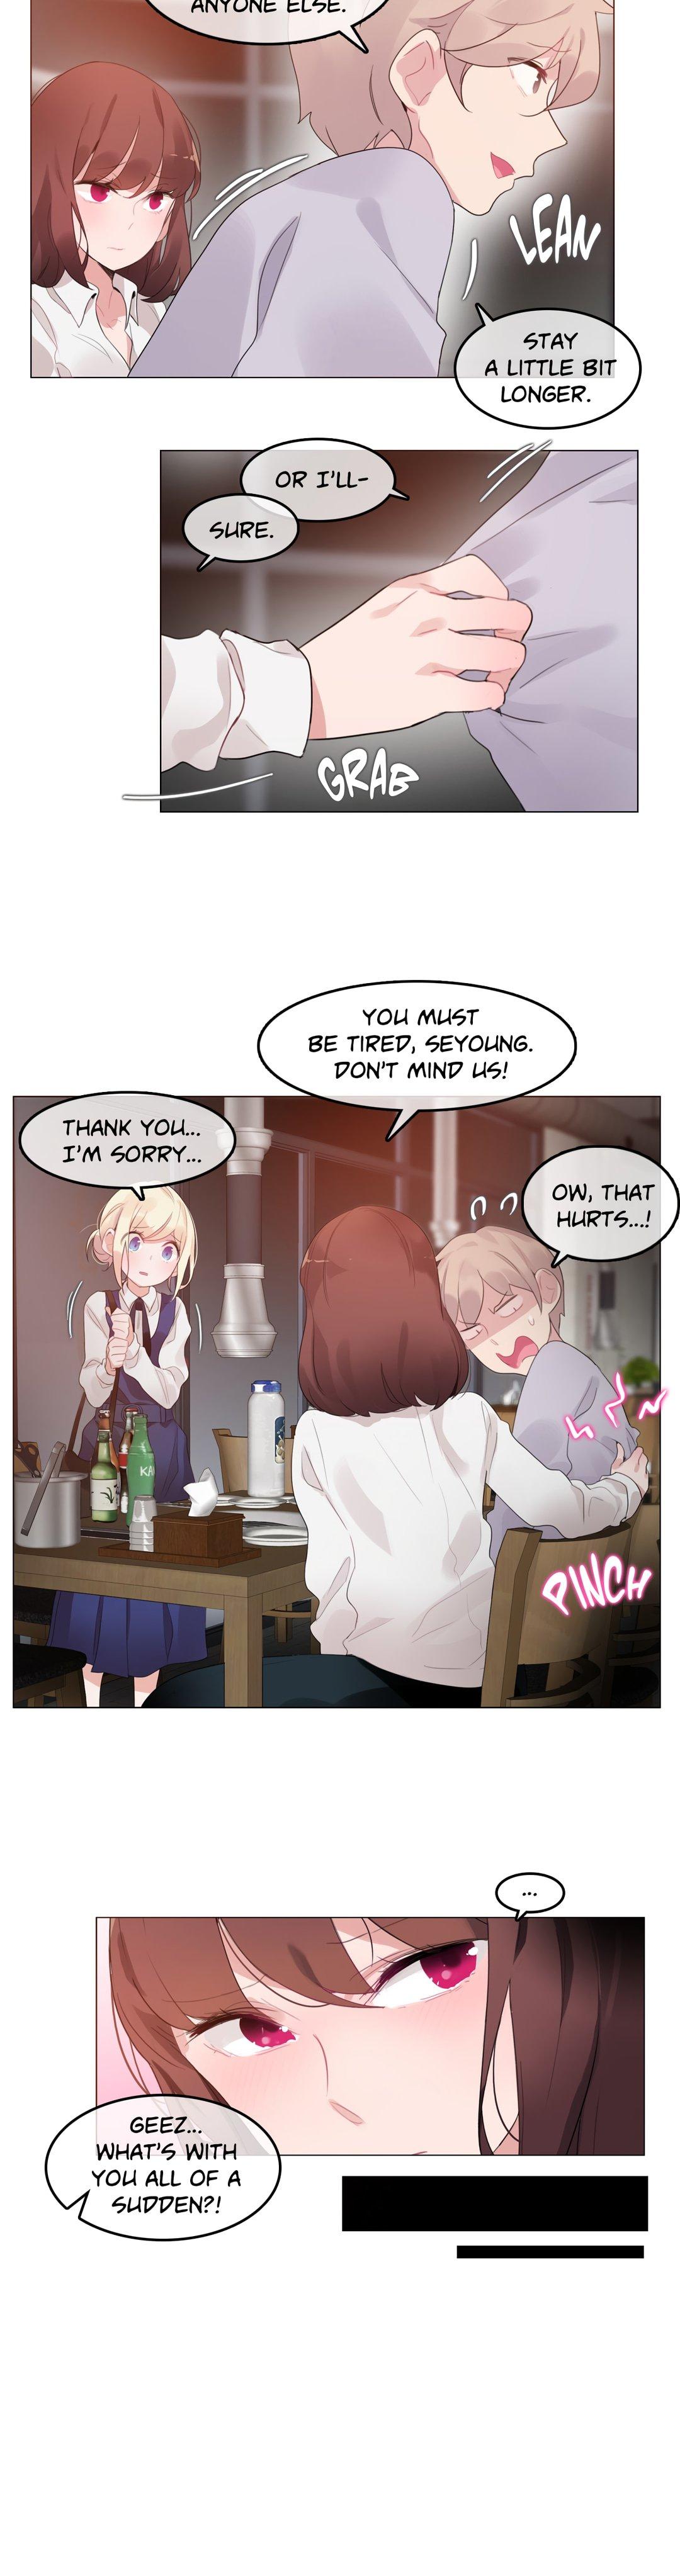 A Pervert's Daily Life • Chapter 51-55 86